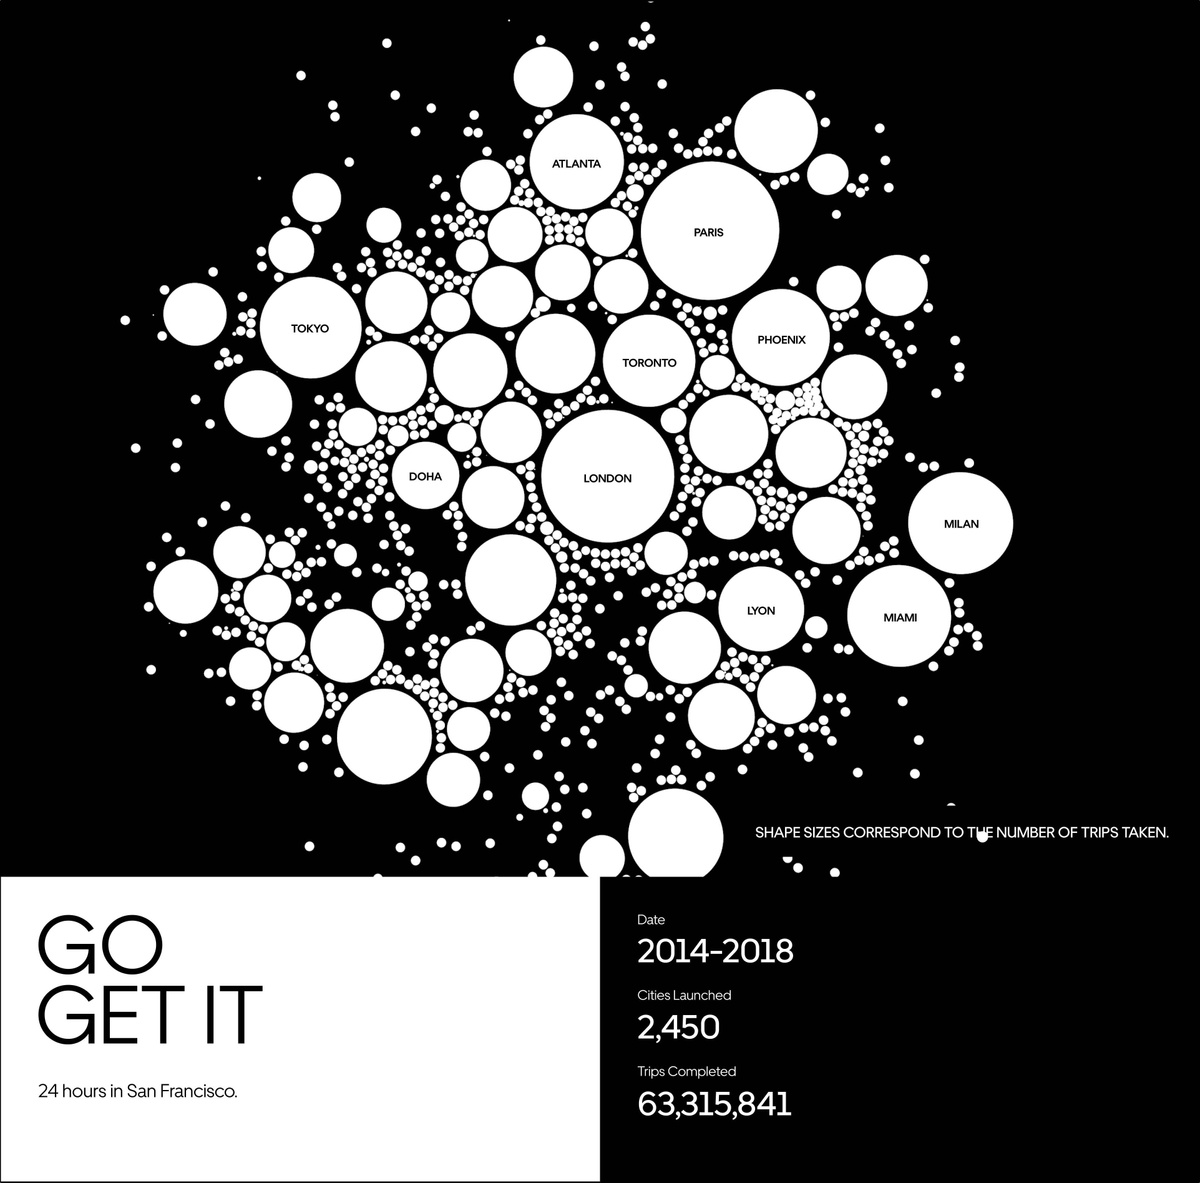 Different size white circle on black background with different city names. Title reads "Go Get it" and dates from 2014-2018 and cities launched 2,450